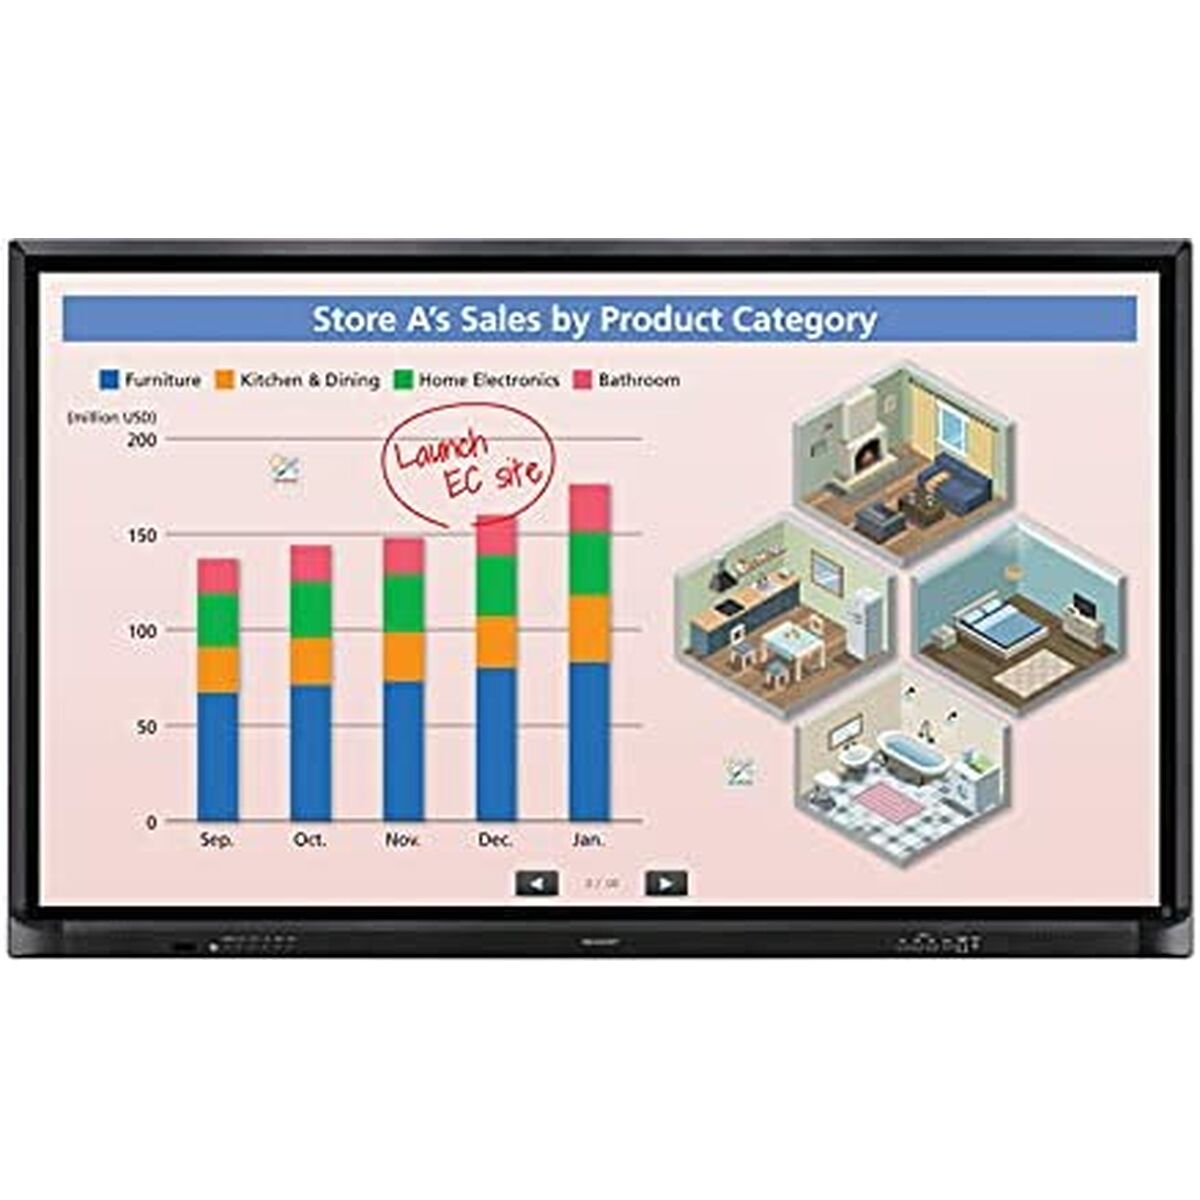 Monitor Videowall NEC PN-70HC1E 3840 x 2160 px 70" LCD, NEC, Computing, monitor-videowall-nec-pn-70hc1e-3840-x-2160-px-70-lcd, :Ultra HD, Brand_NEC, category-reference-2609, category-reference-2642, category-reference-2644, category-reference-t-19685, computers / peripherals, Condition_NEW, office, Price_+ 1000, Teleworking, RiotNook